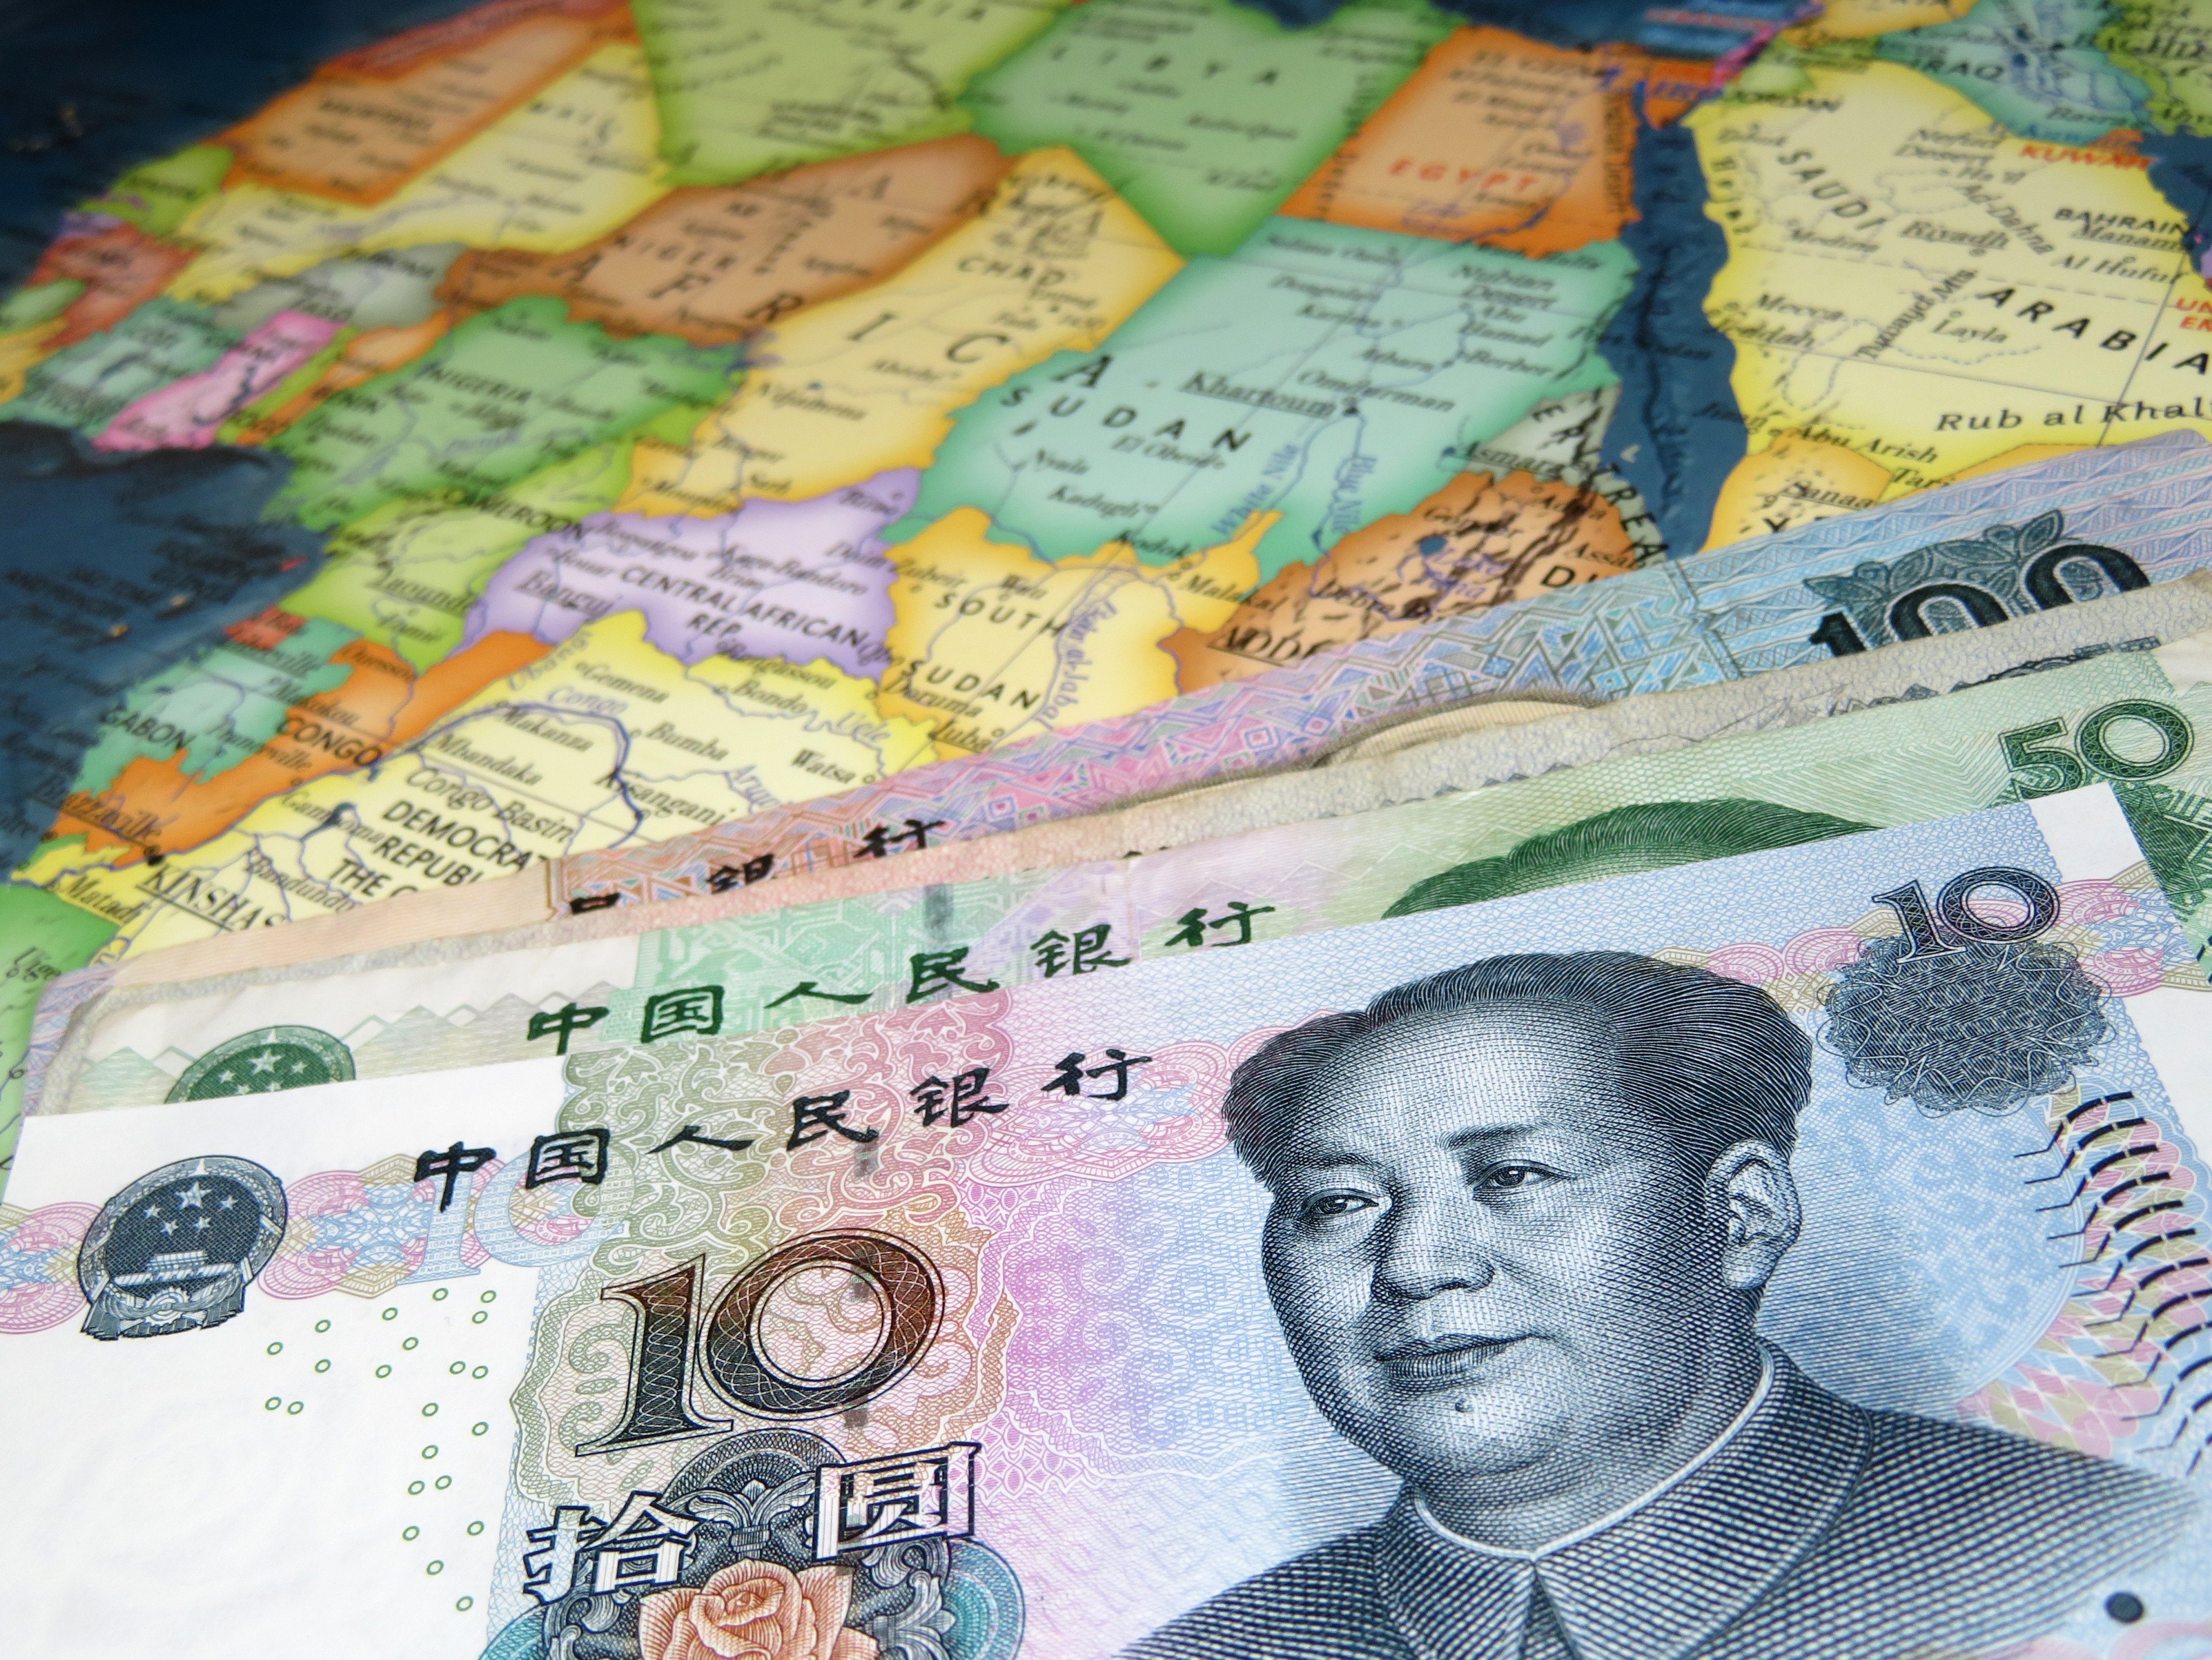 China has encouraged the use of local currencies across various African countries as part of its de-dollarisation bid, and pushed for the issuance of cross-border yuan-denominated “panda” bonds. Photo: Shutterstock